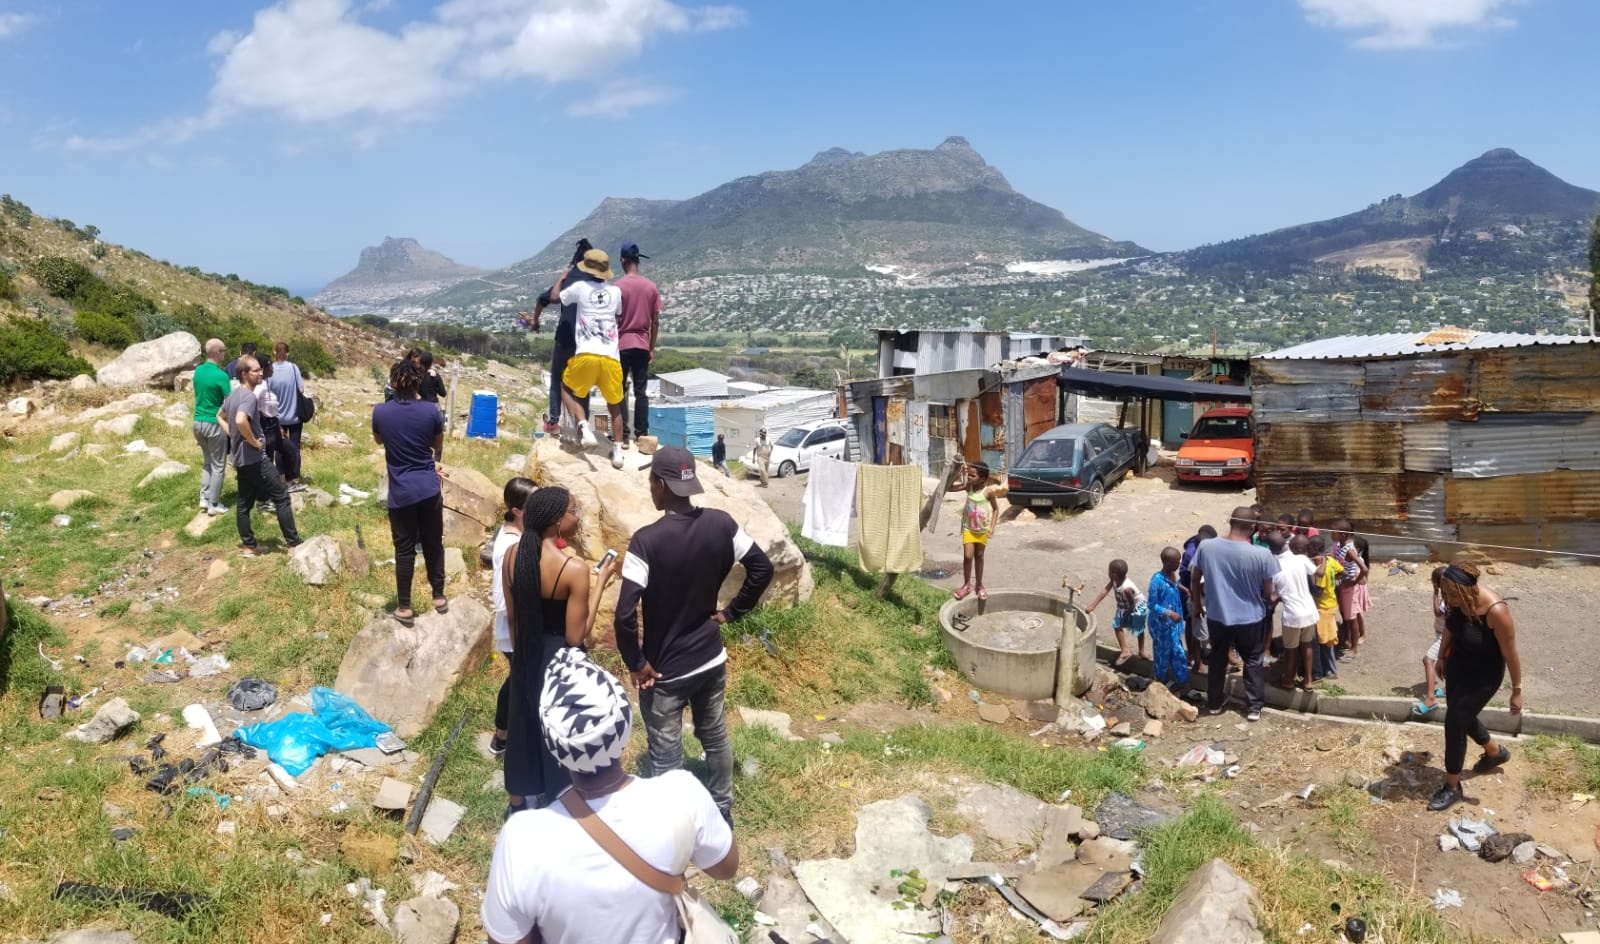 Process photograph from the offsite ‘Ghetto Relay - Lalela experiment’ exchange. At the front, various participants stand on the edge of the ‘Imizamo Yethu’ township in Hout Bay, with houses made of corrugated iron plating visible on the right. At the back, Table Mountain is visible in the distance.
